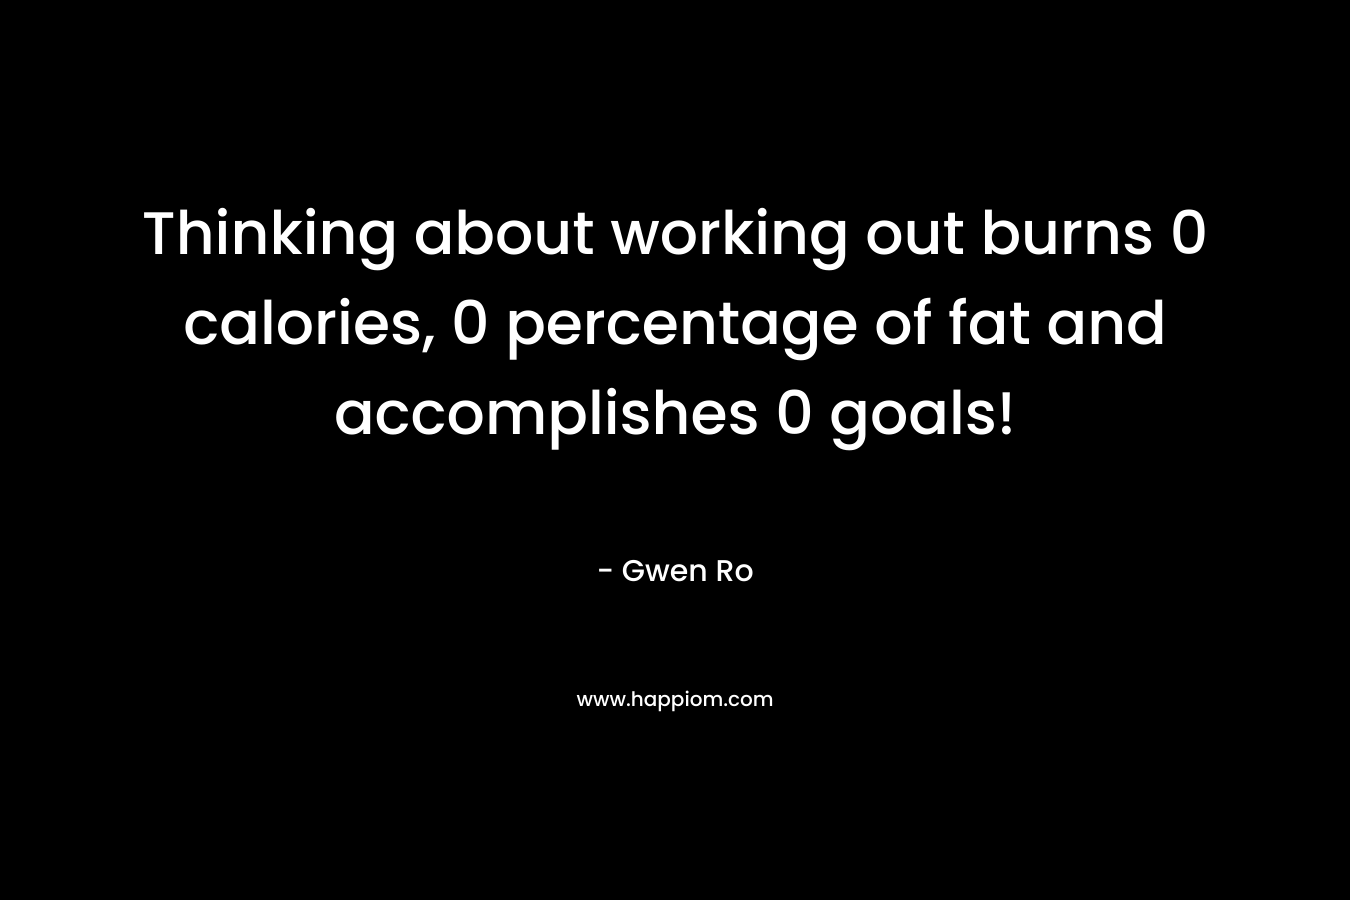 Thinking about working out burns 0 calories, 0 percentage of fat and accomplishes 0 goals! – Gwen Ro